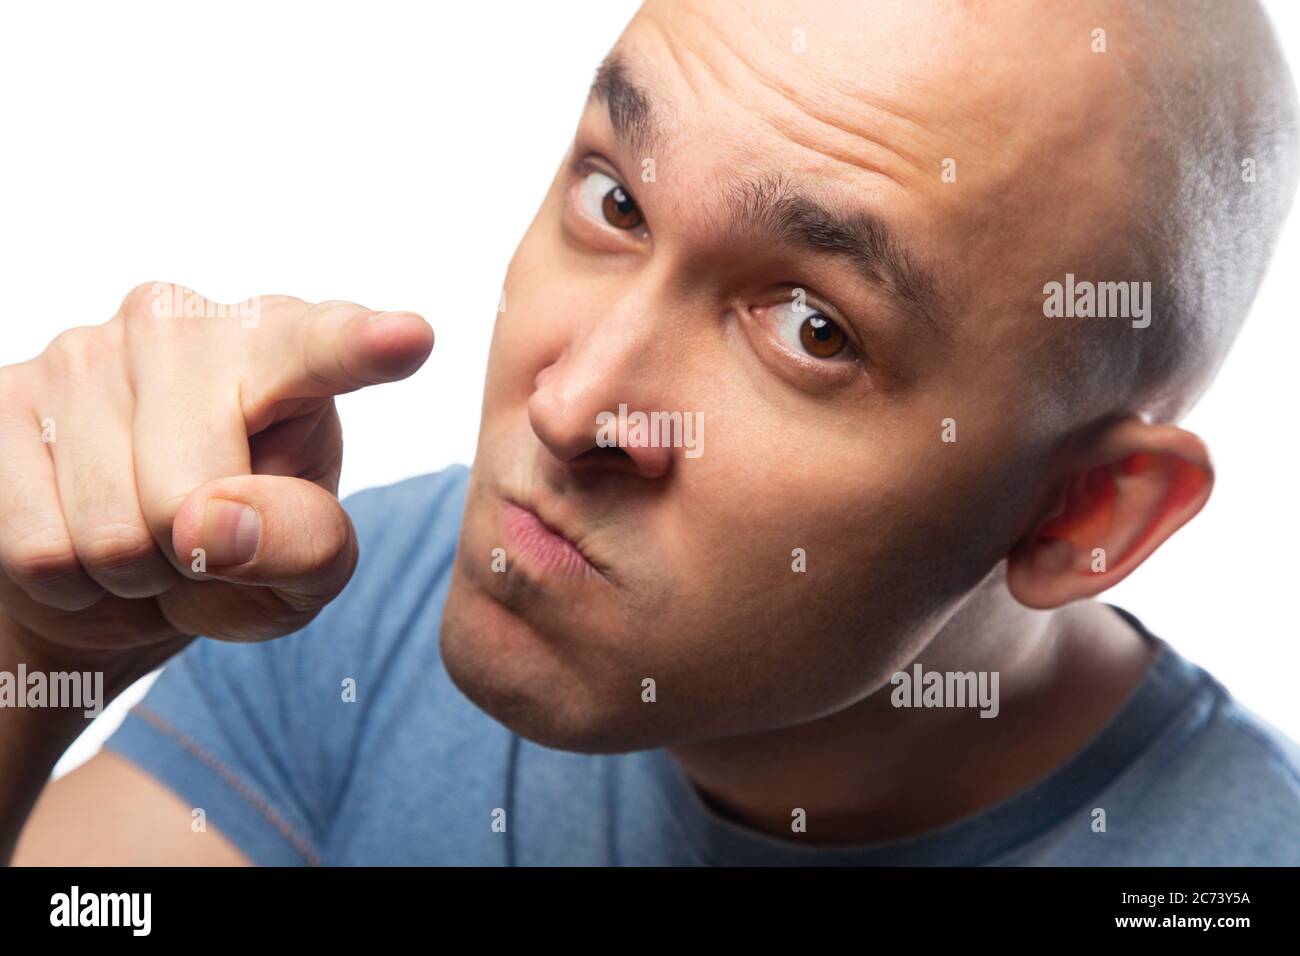 Image of young bald threatening pointing man Stock Photo